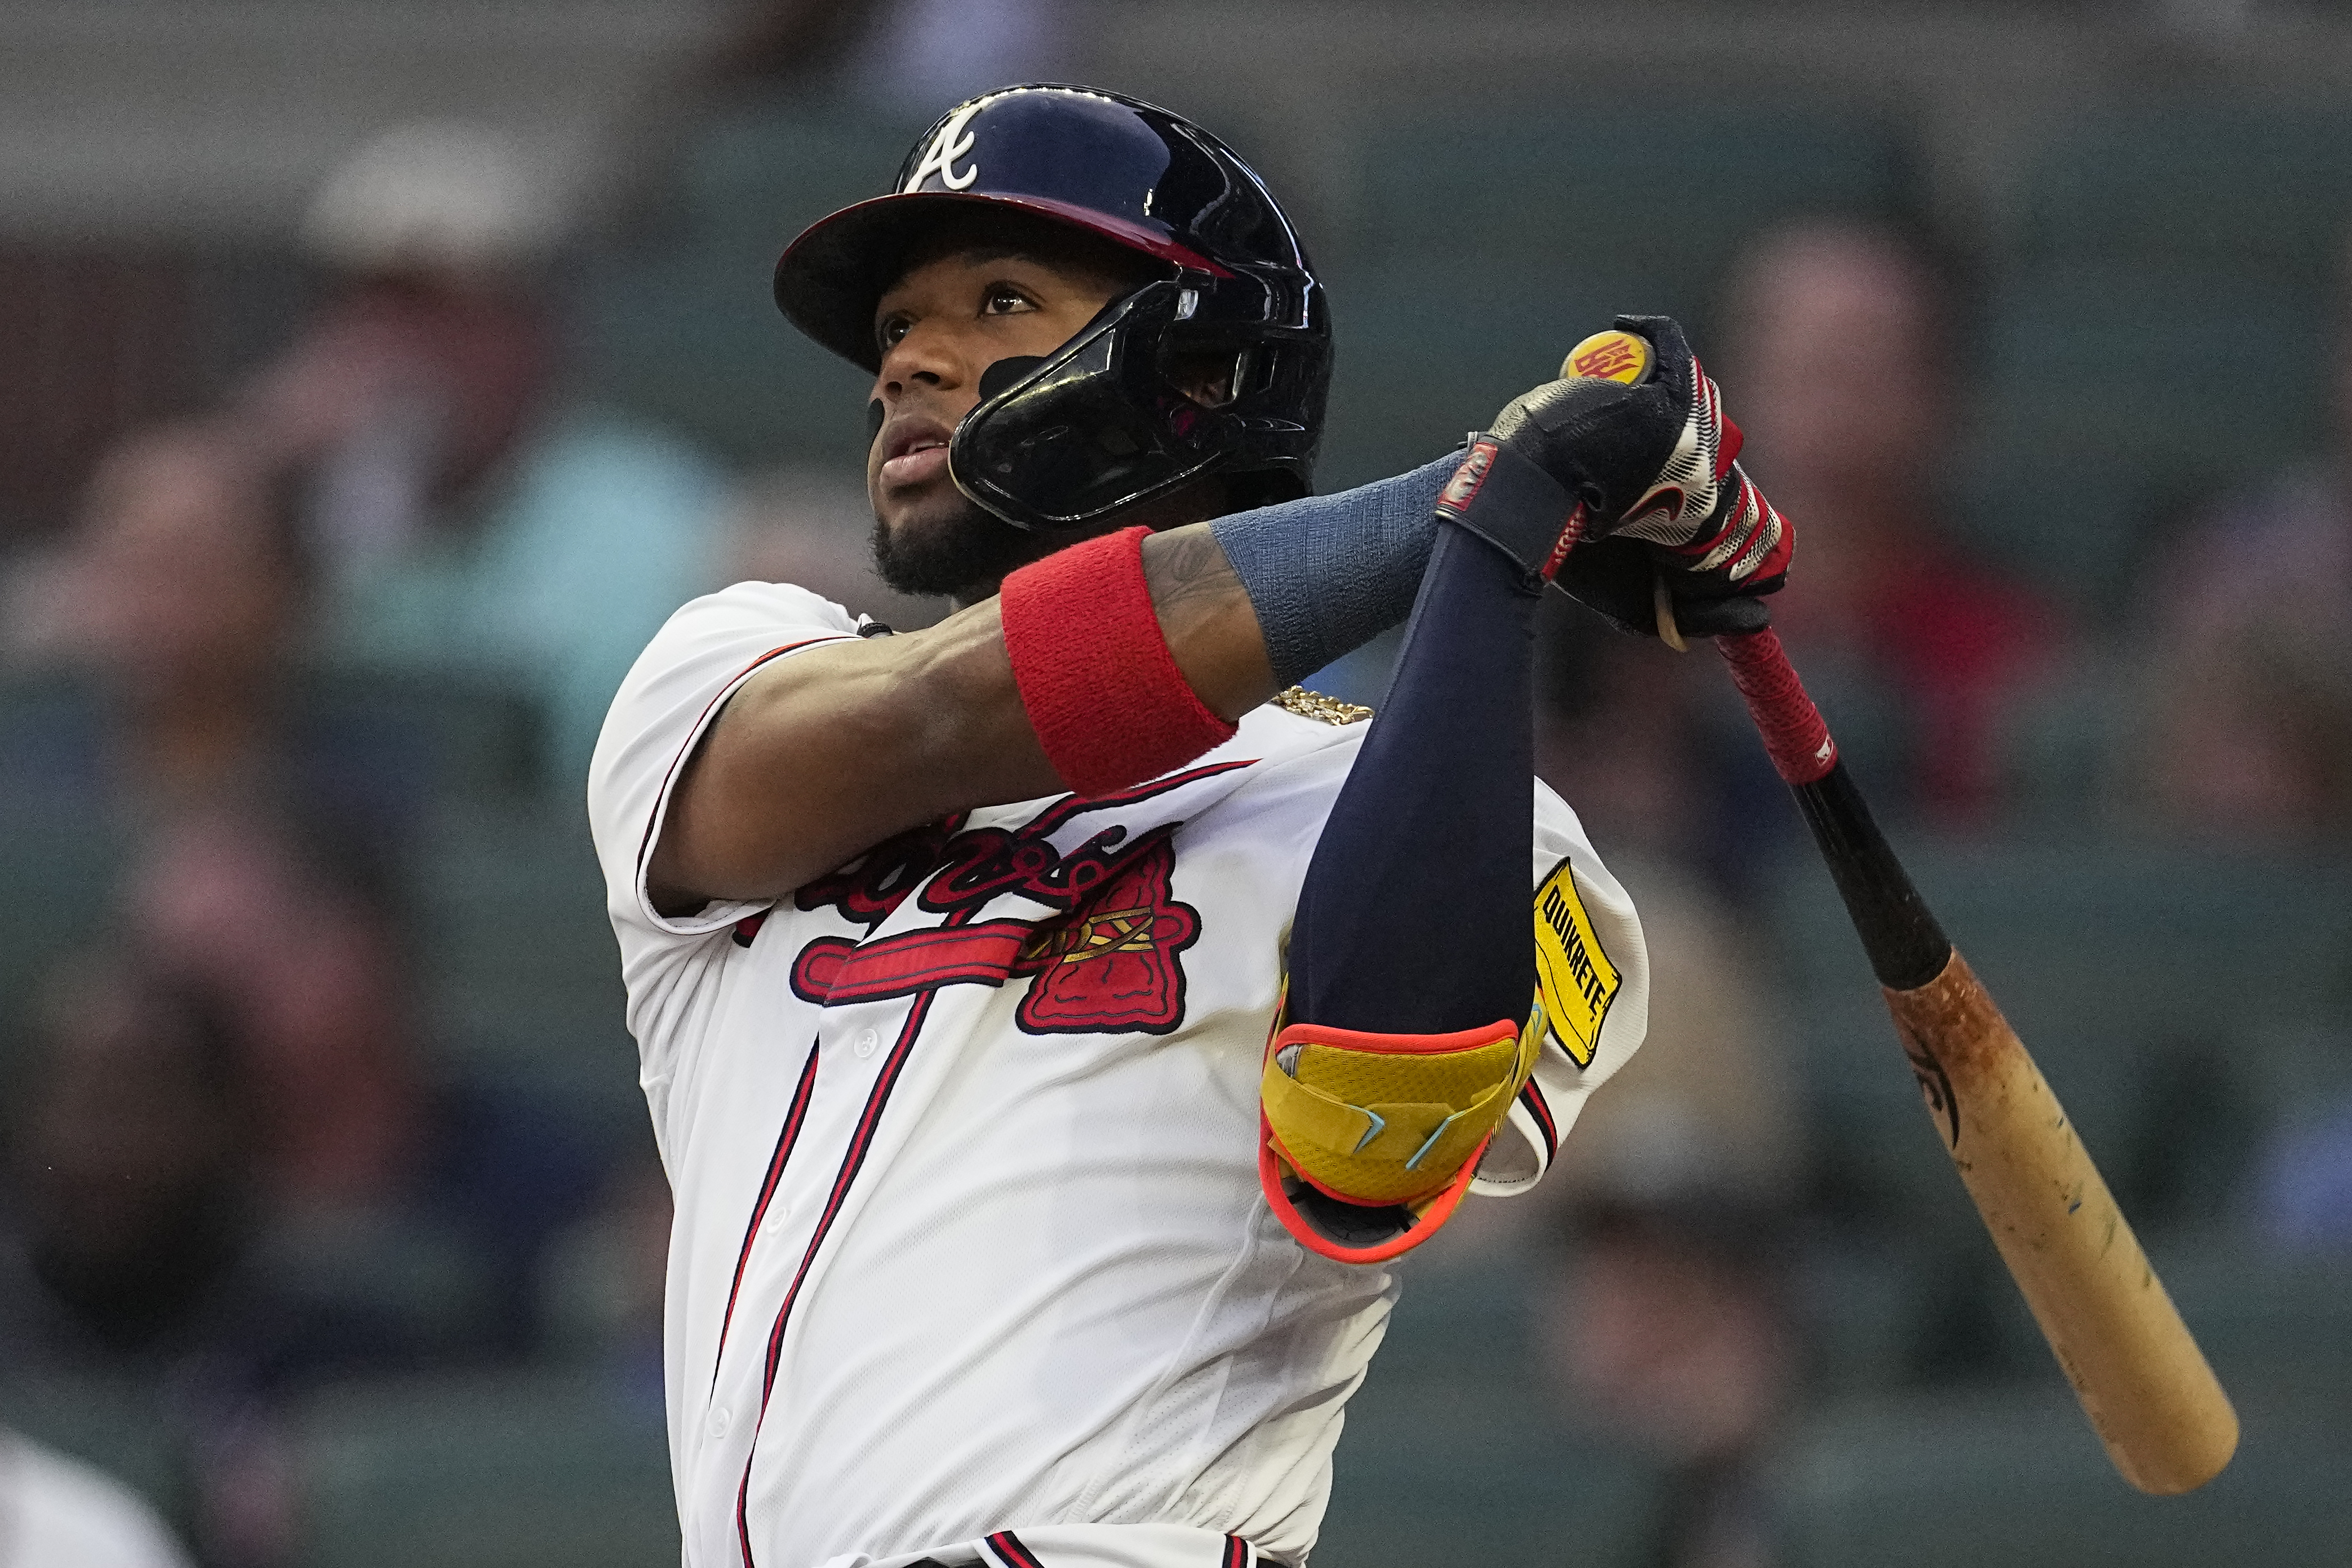 Ronald Acuna Makes His Own Record